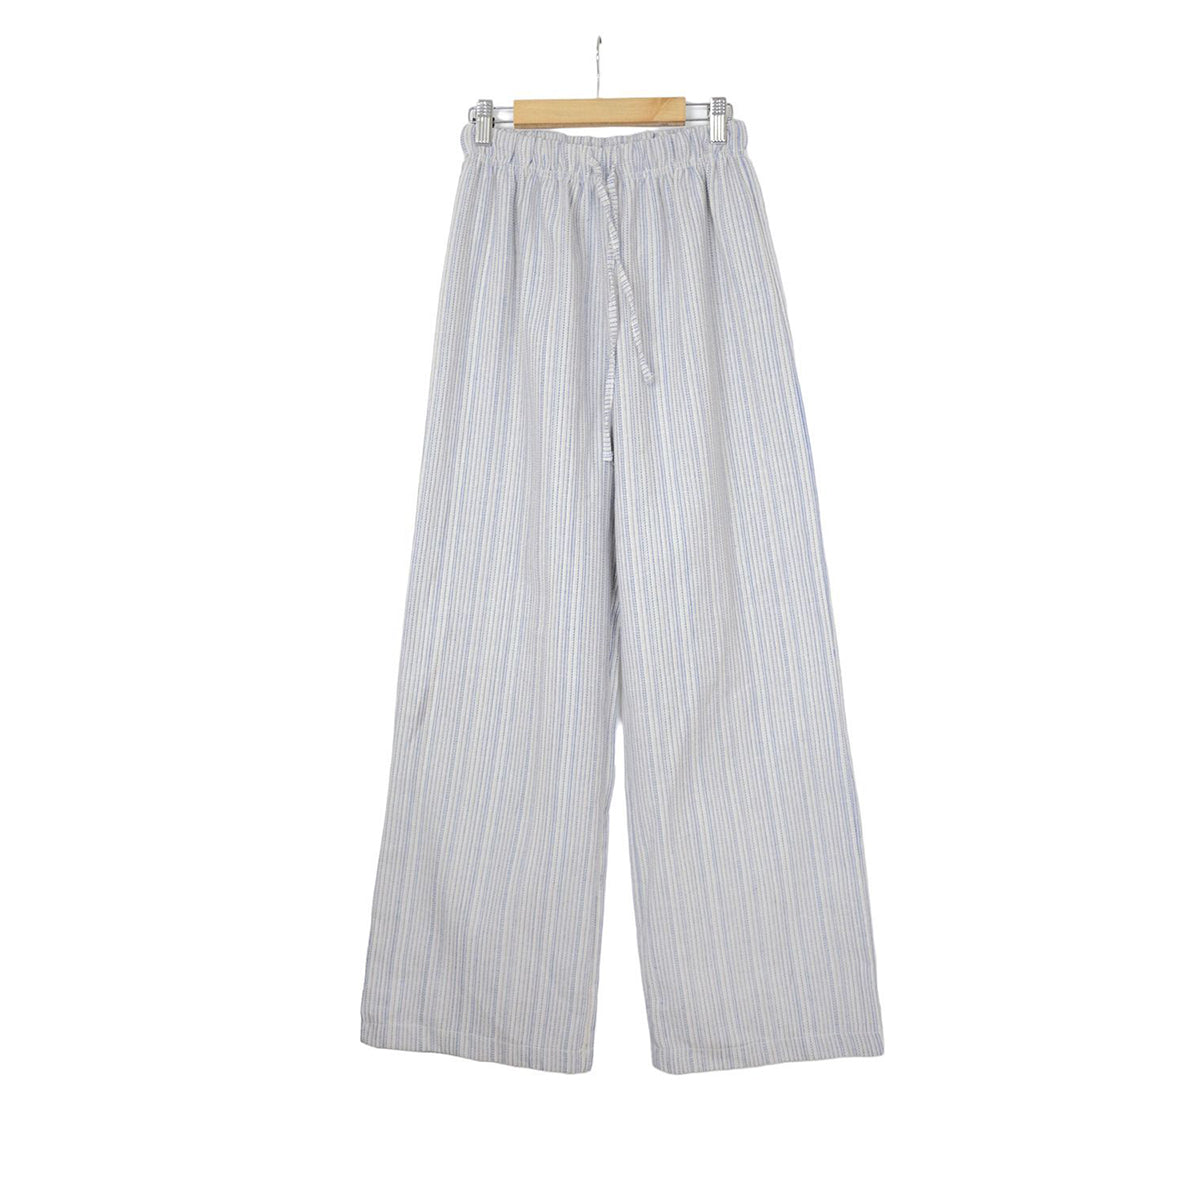 Nutty Stripe Banded Pants